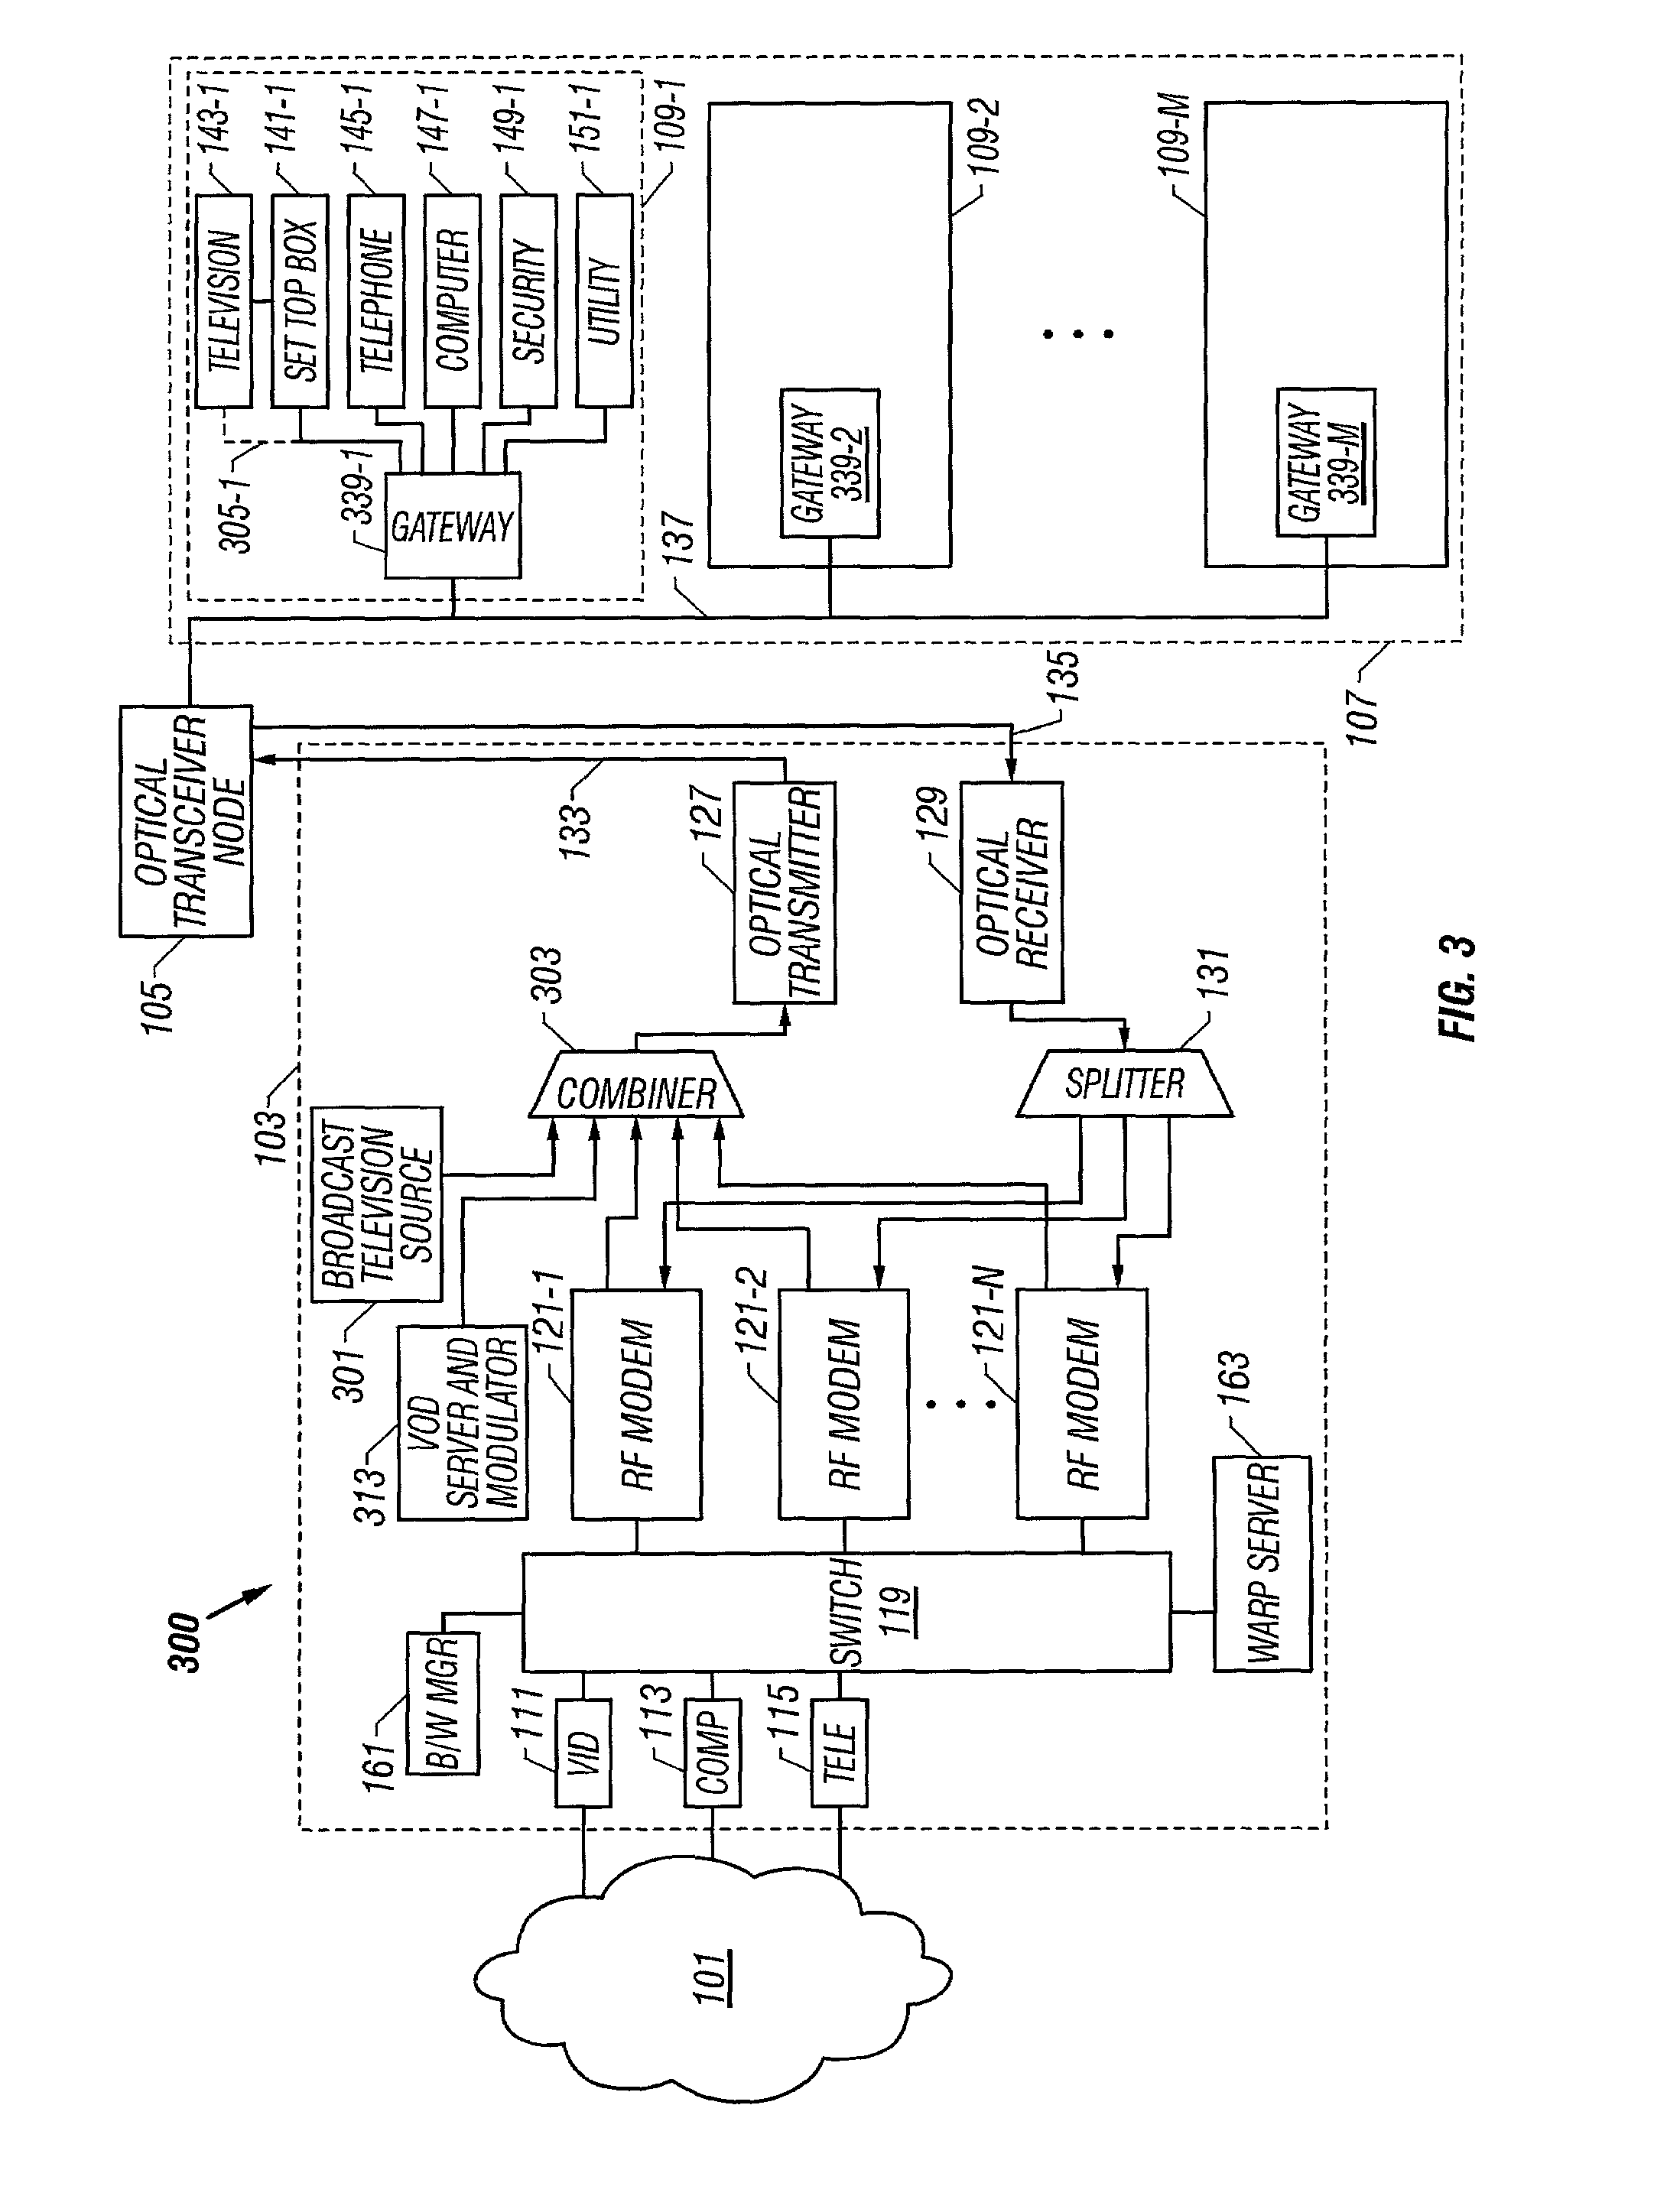 System and method for distributing information via a communication network